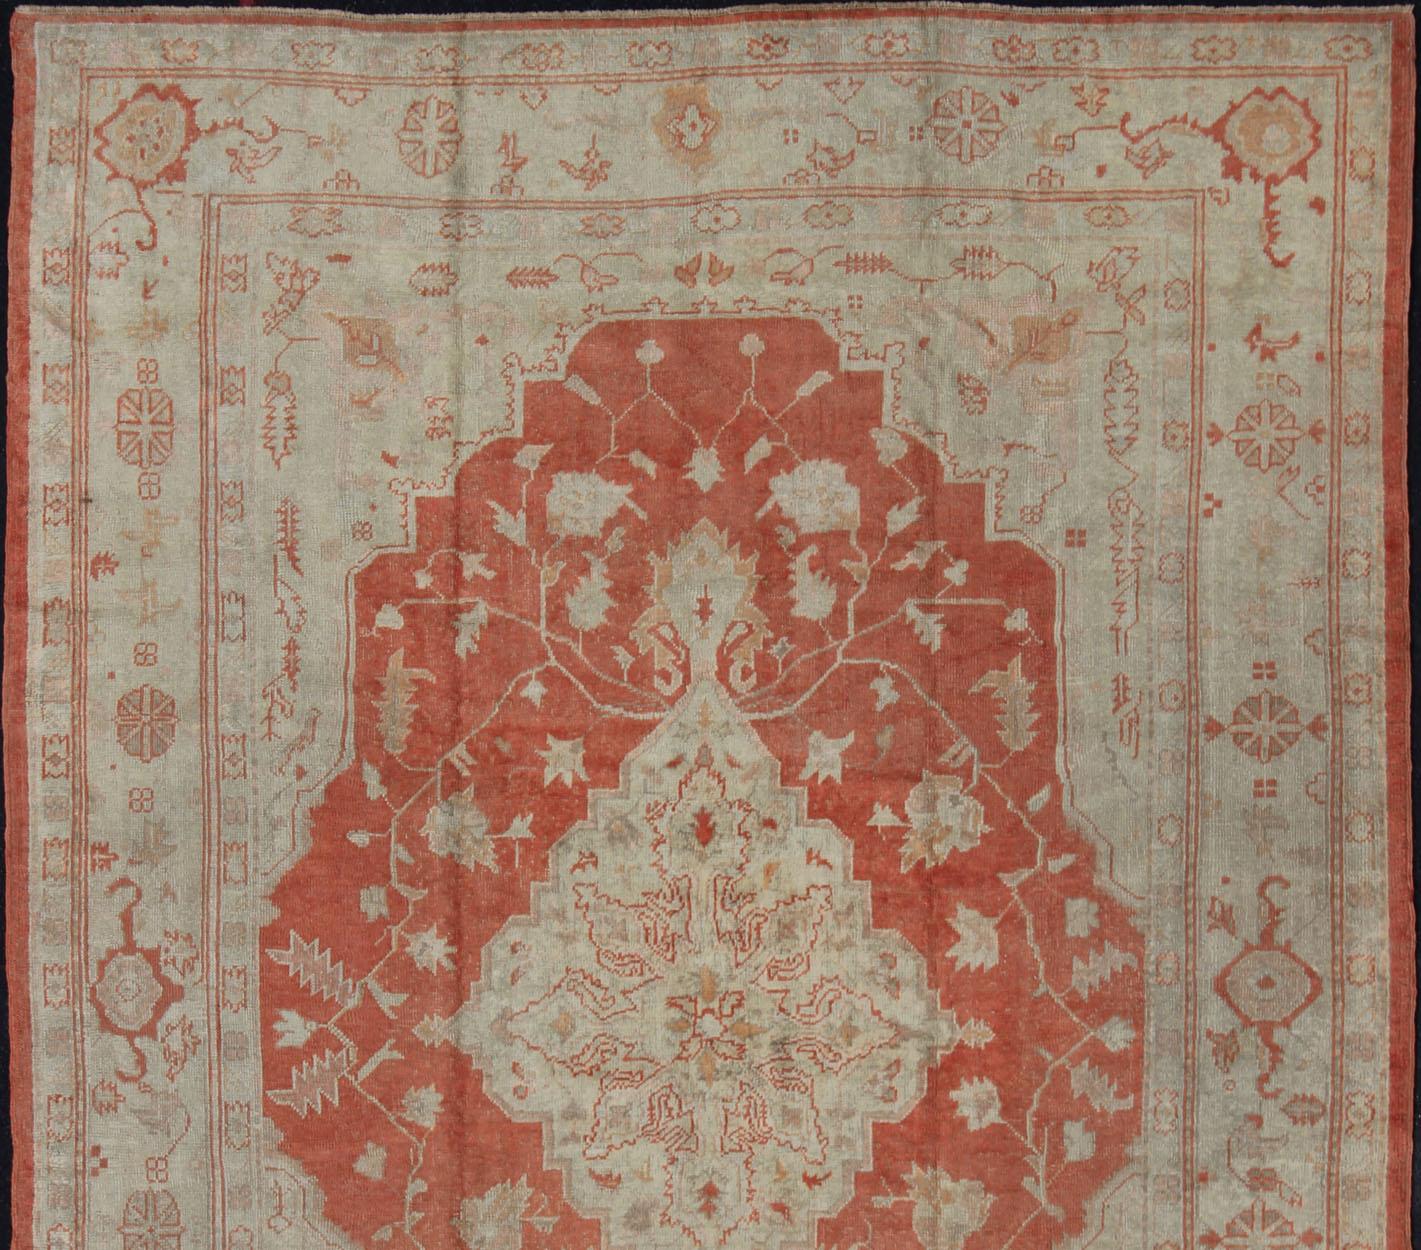 Antique Turkish Oushak Carpet With Medallion In Cream and Soft Orange. Keivan Woven Arts / Rug / BHR-3 / country of origin / type: Turkey / Oushak, circa 1900. Antique oushak, Turkish oushak
Measures: 9.1 x 12.6.
This beautiful rug from early 20th